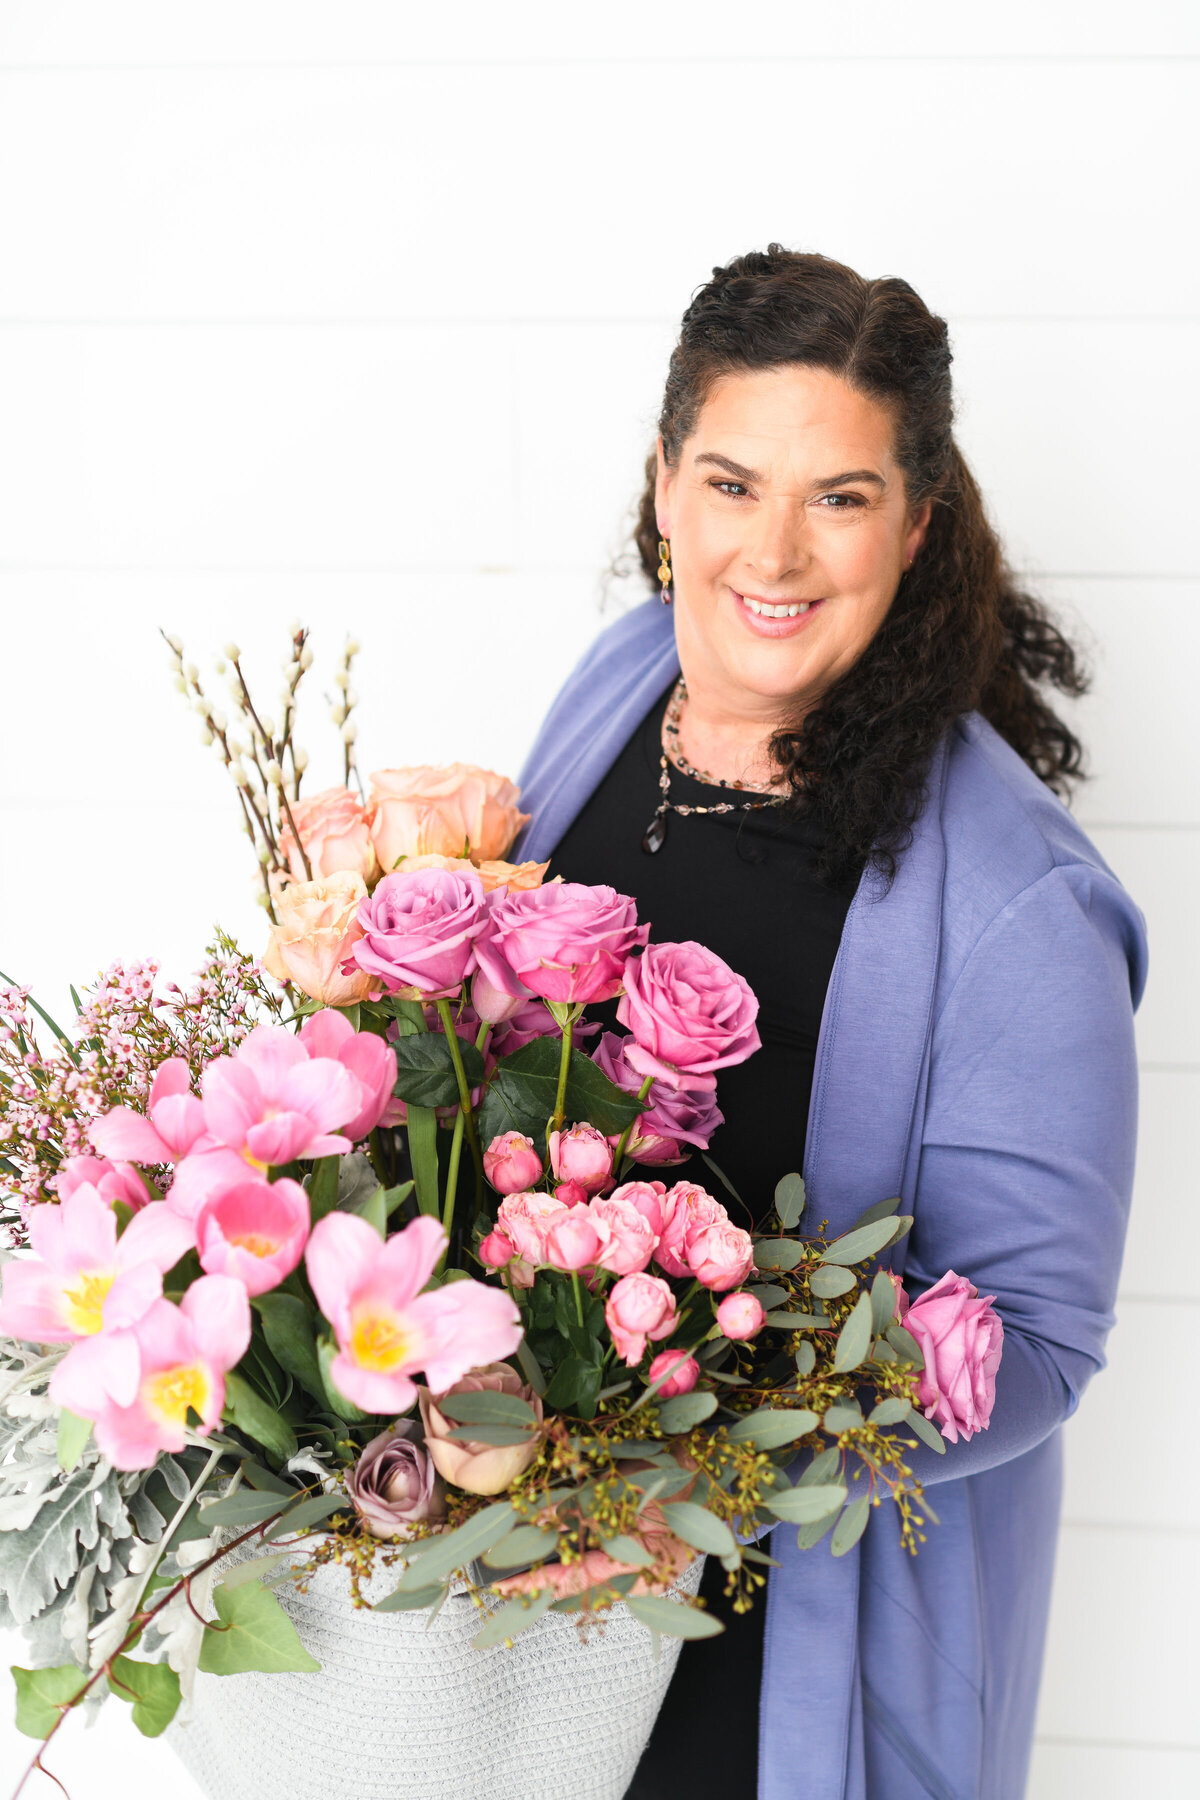 Just Bloom'd Weddings is pleased to introduce our lead designer, Allison Hassard - AIFD!